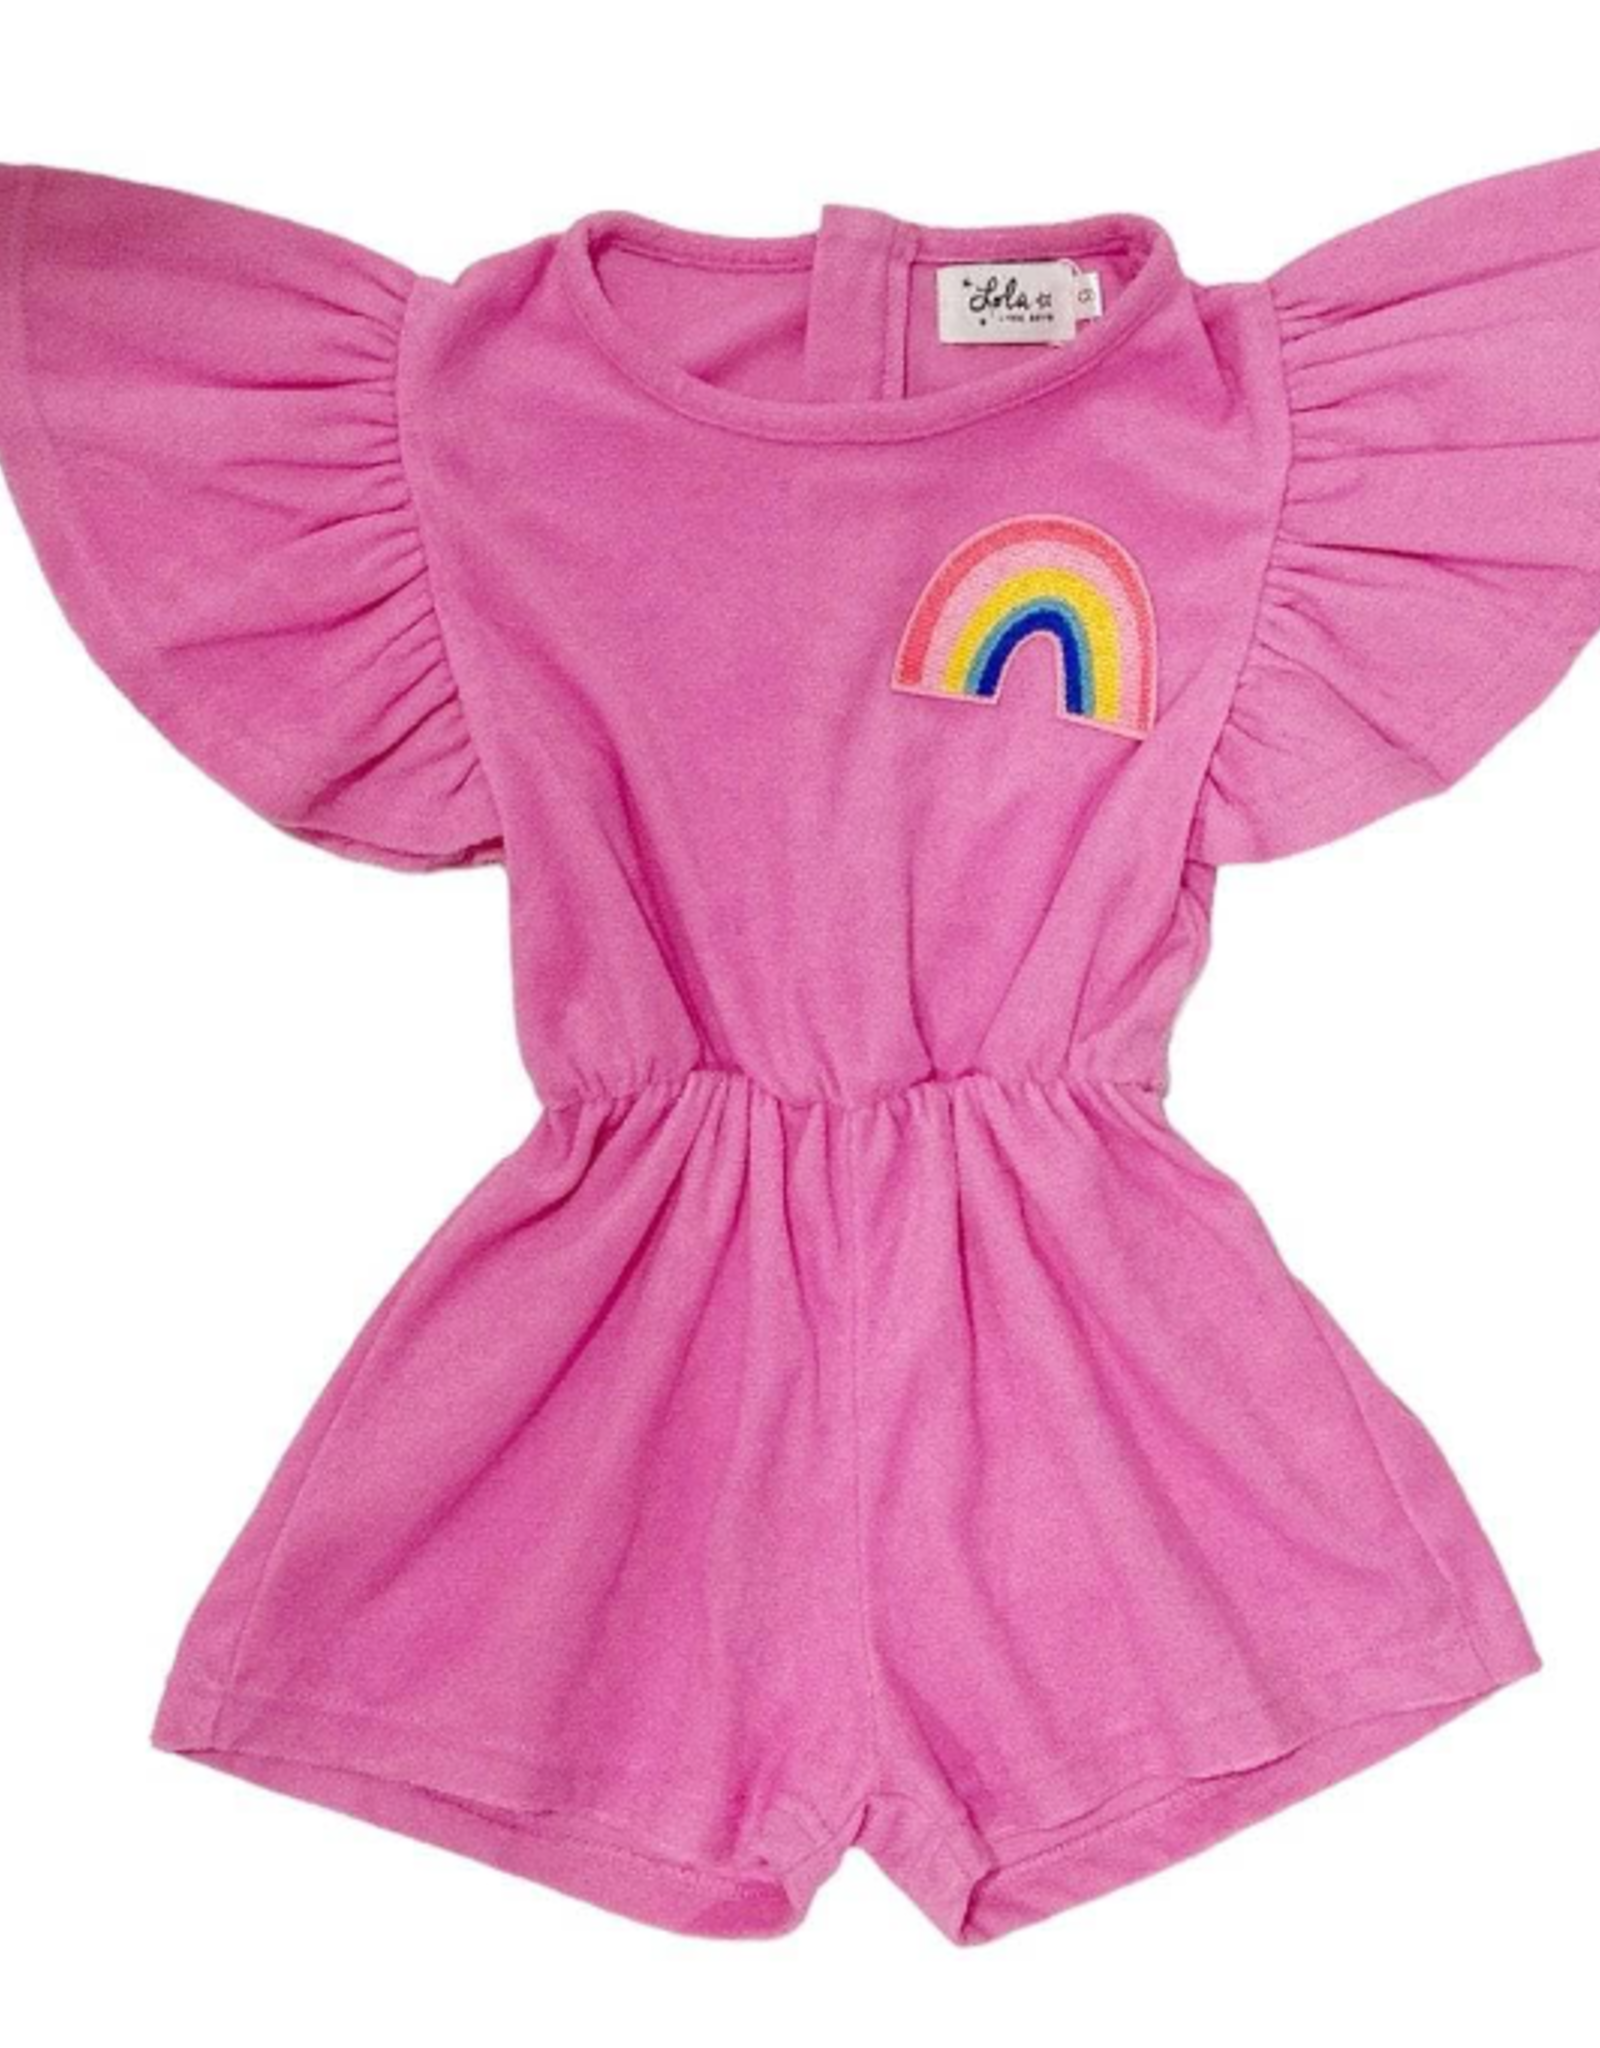 Lola and the Boys Pink Terry Rainbow Romper